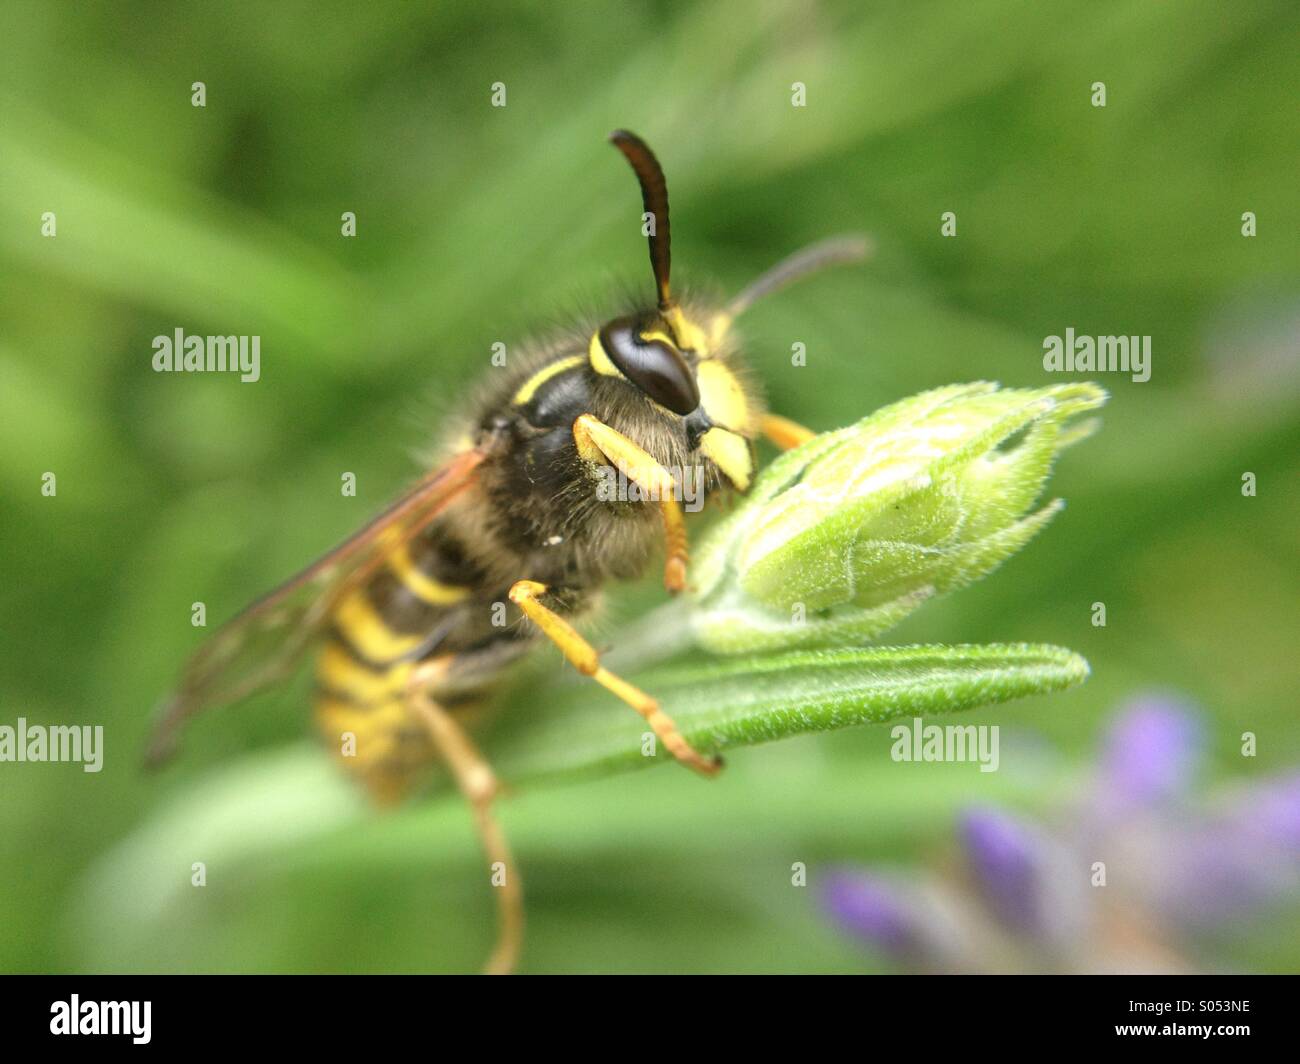 Close-up of a wasp on a plant Stock Photo